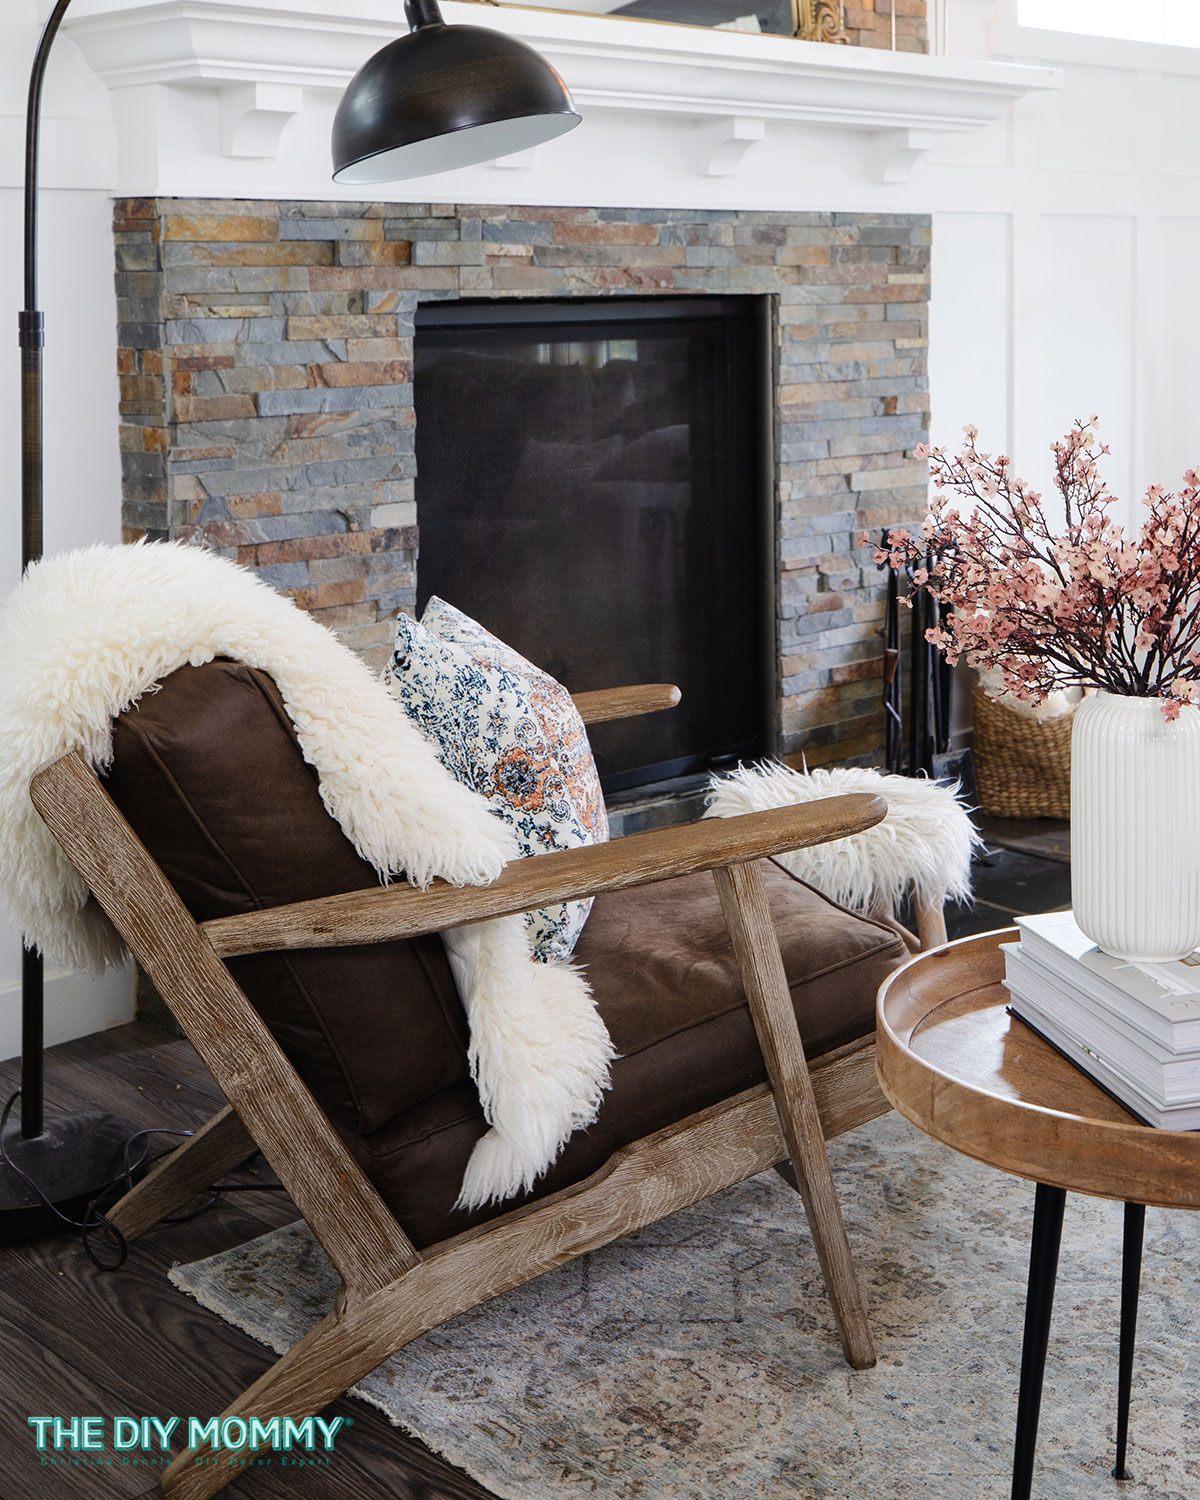 White sheepskin rug draped on brown chair in cozy living room.